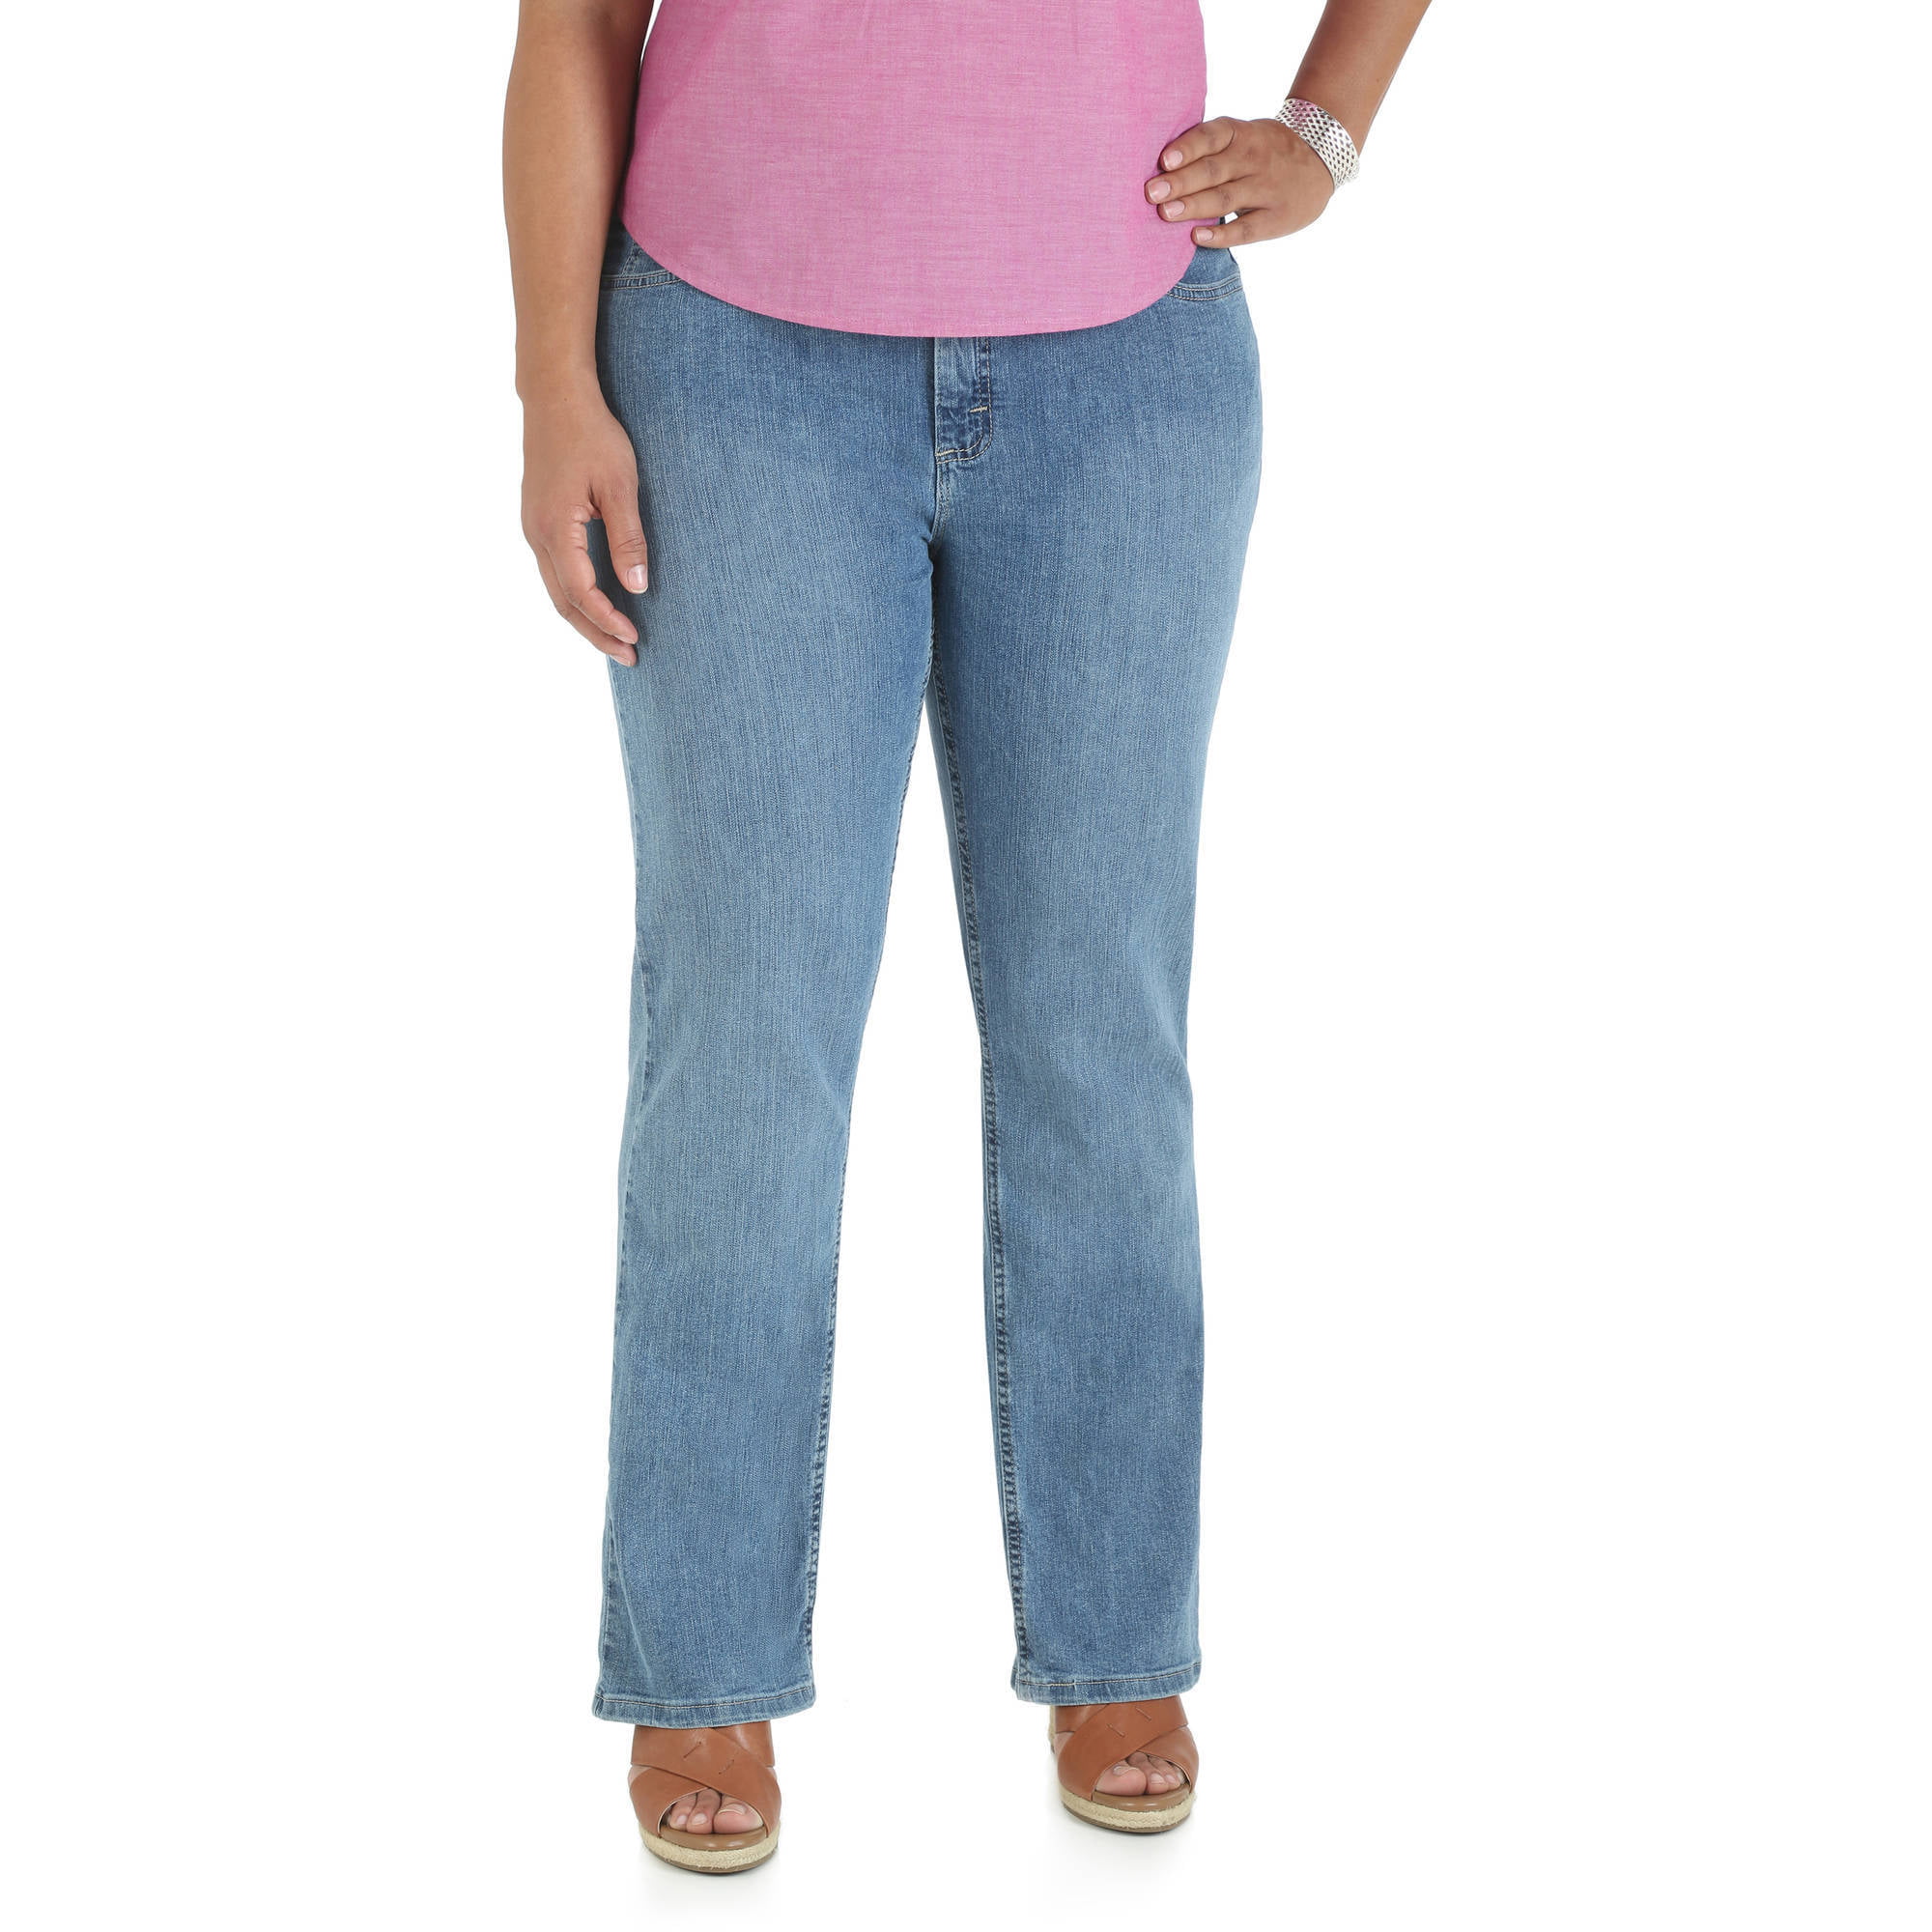 Lee Riders Women's Plus Relaxed Jean 